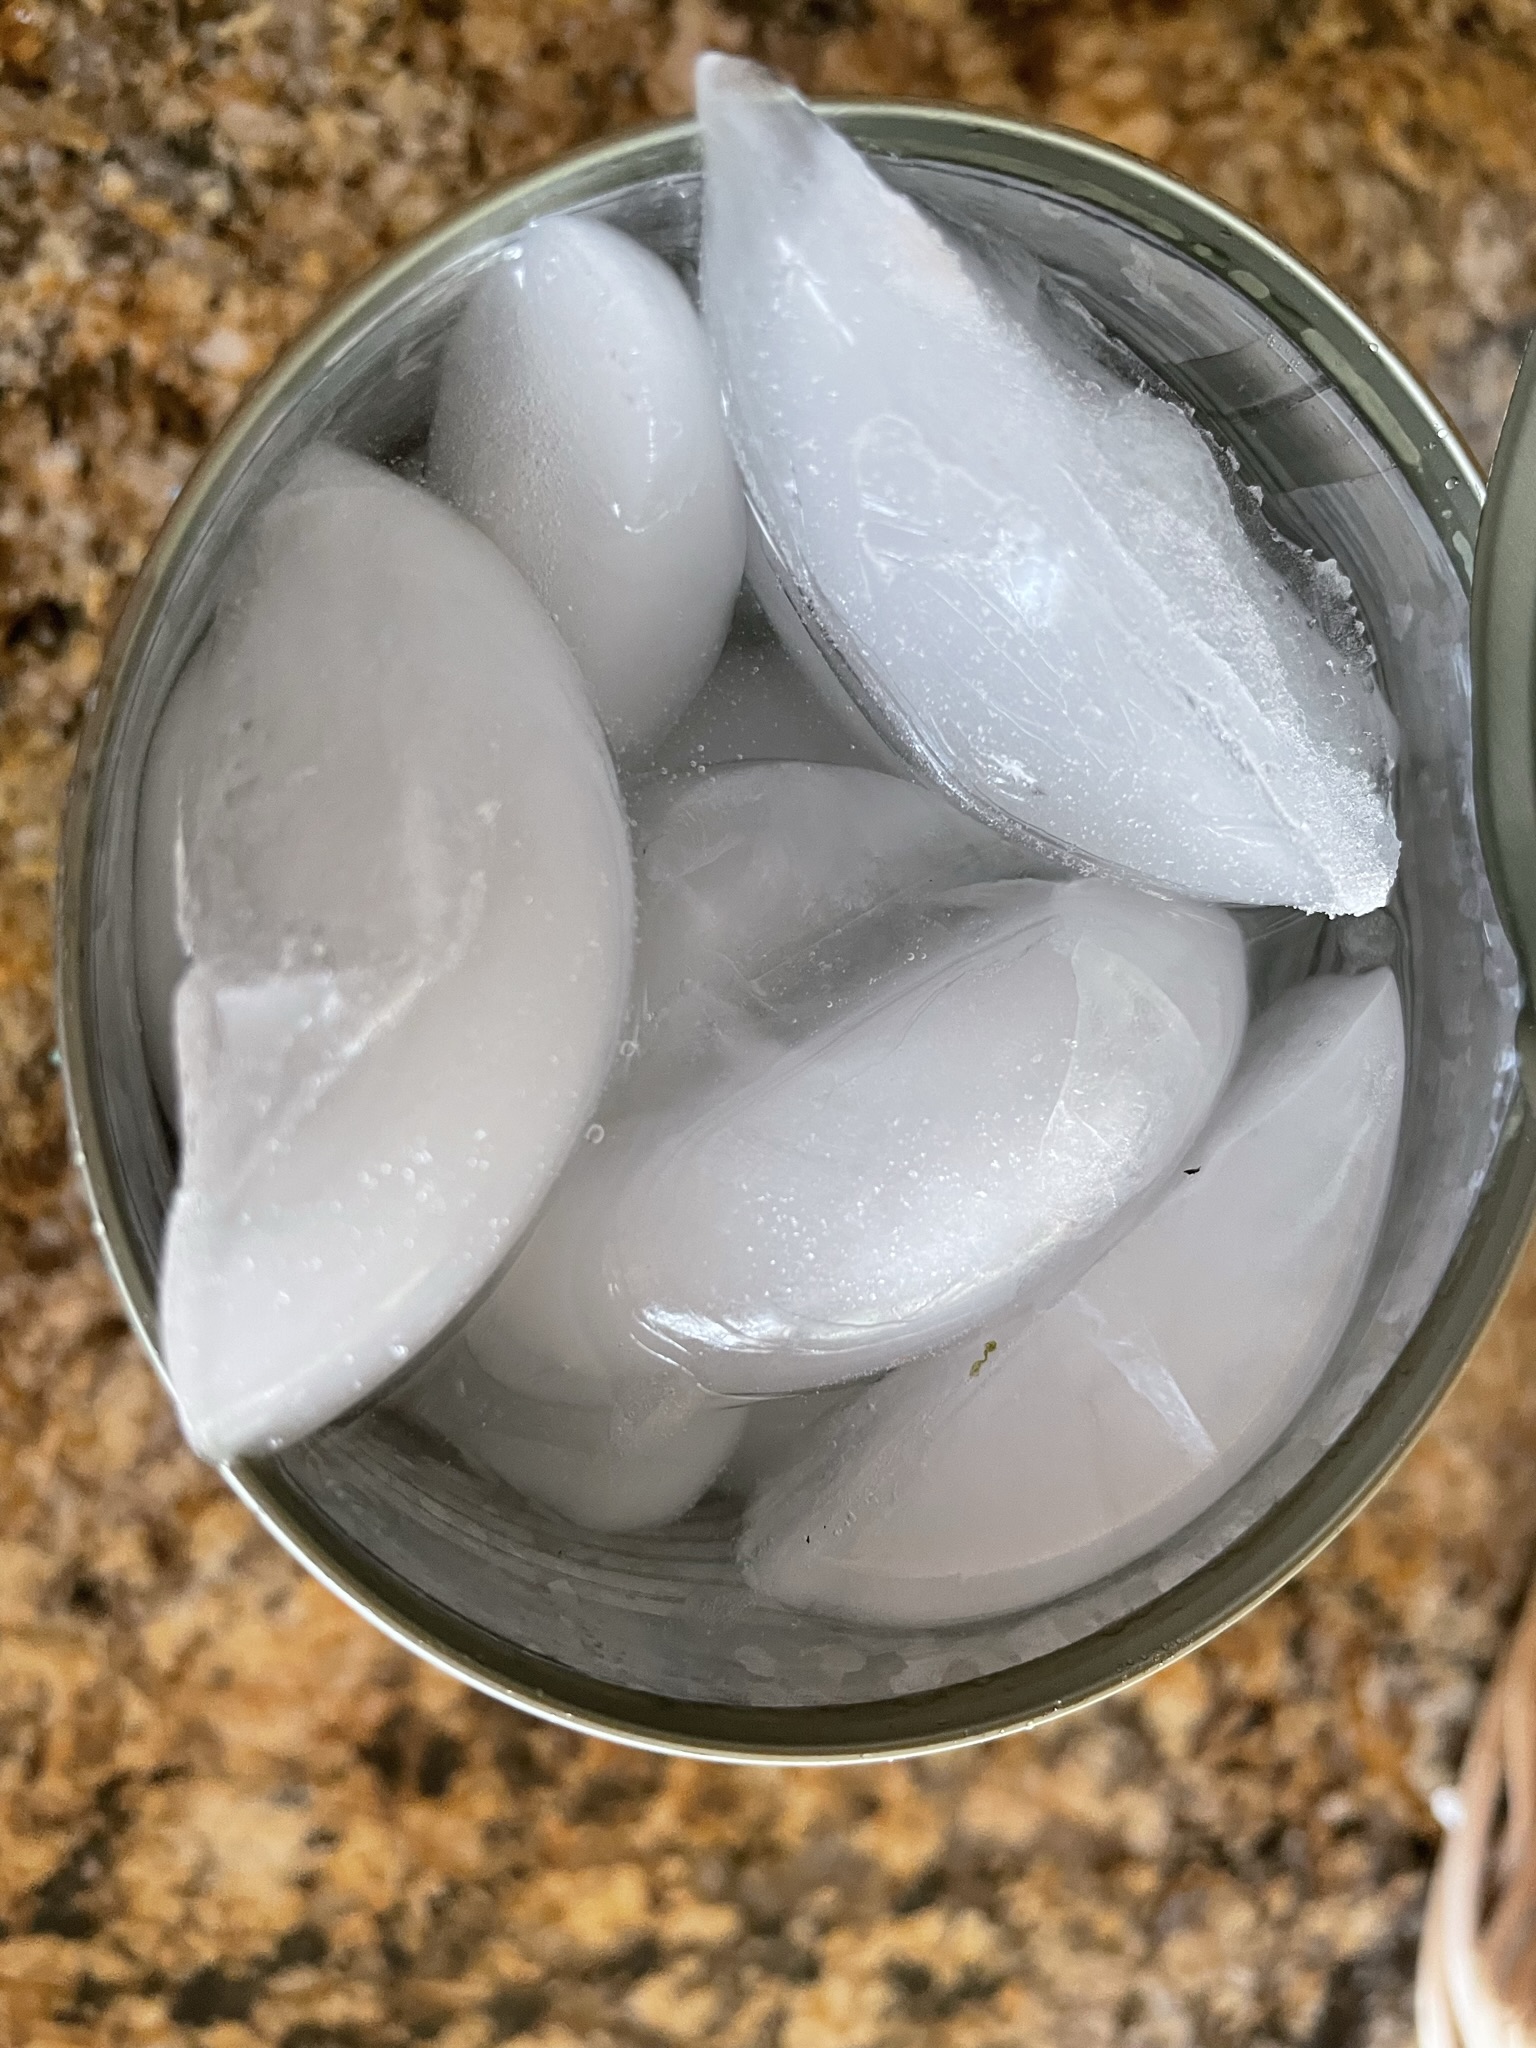 Add a can of iced water.